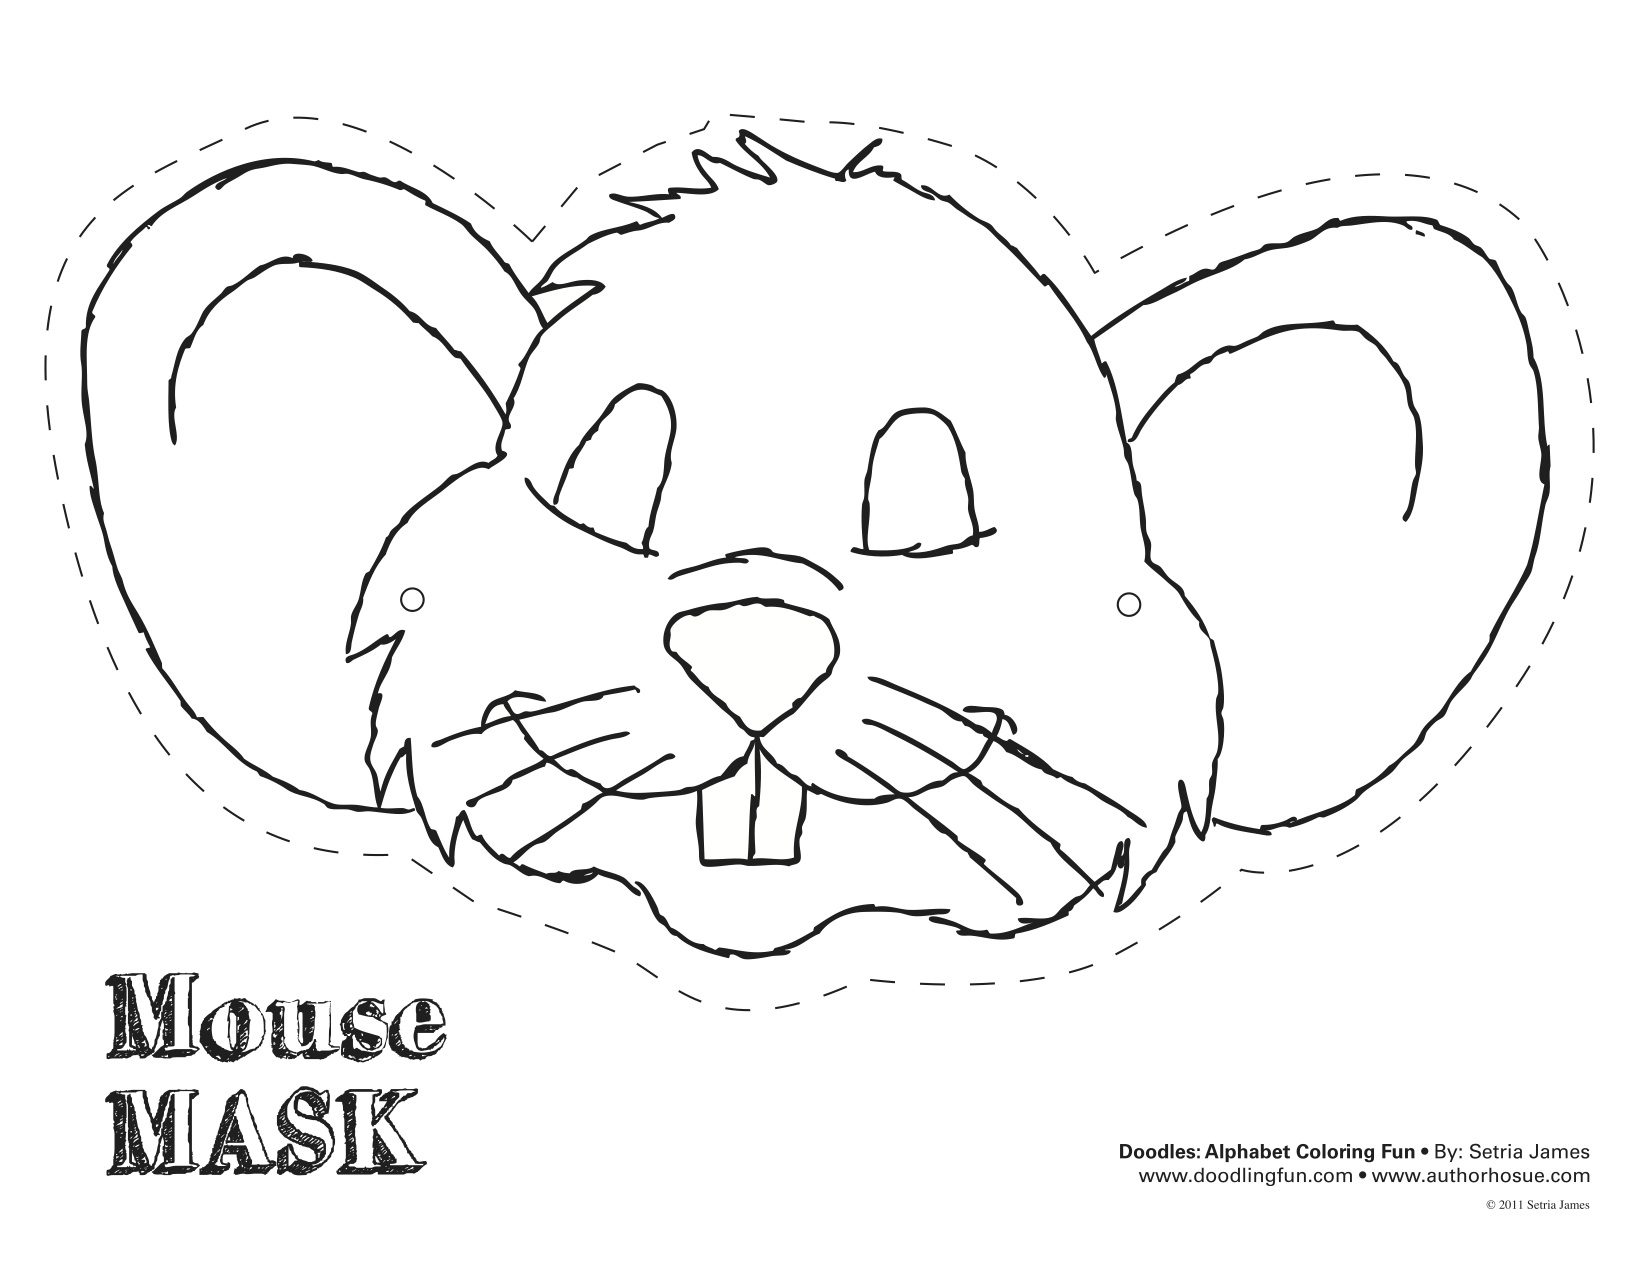 Mouse Mask Theatrics Kiddos Play Craft Coloring Craft Activities Mouse Mask Animal Mask Templates